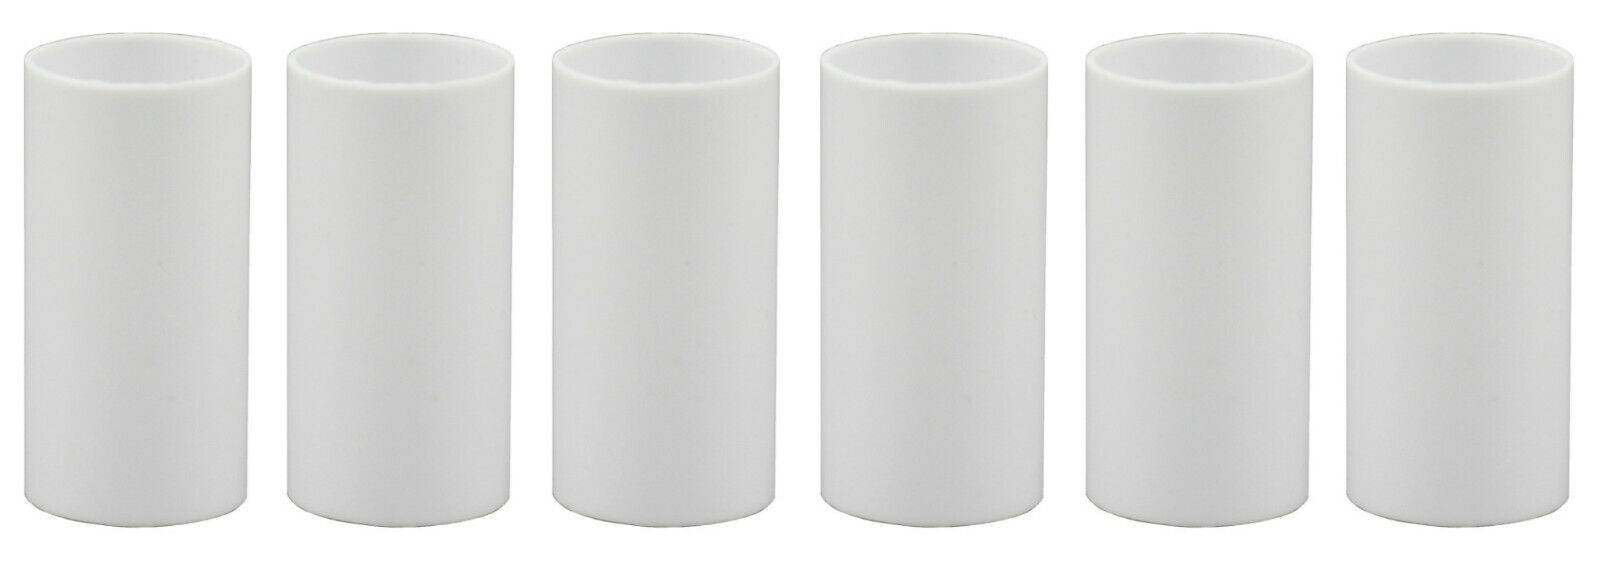 1 3/4 Inch White Plastic Candle Cover For Candelabra Base Lamp Sockets 6 Pieces